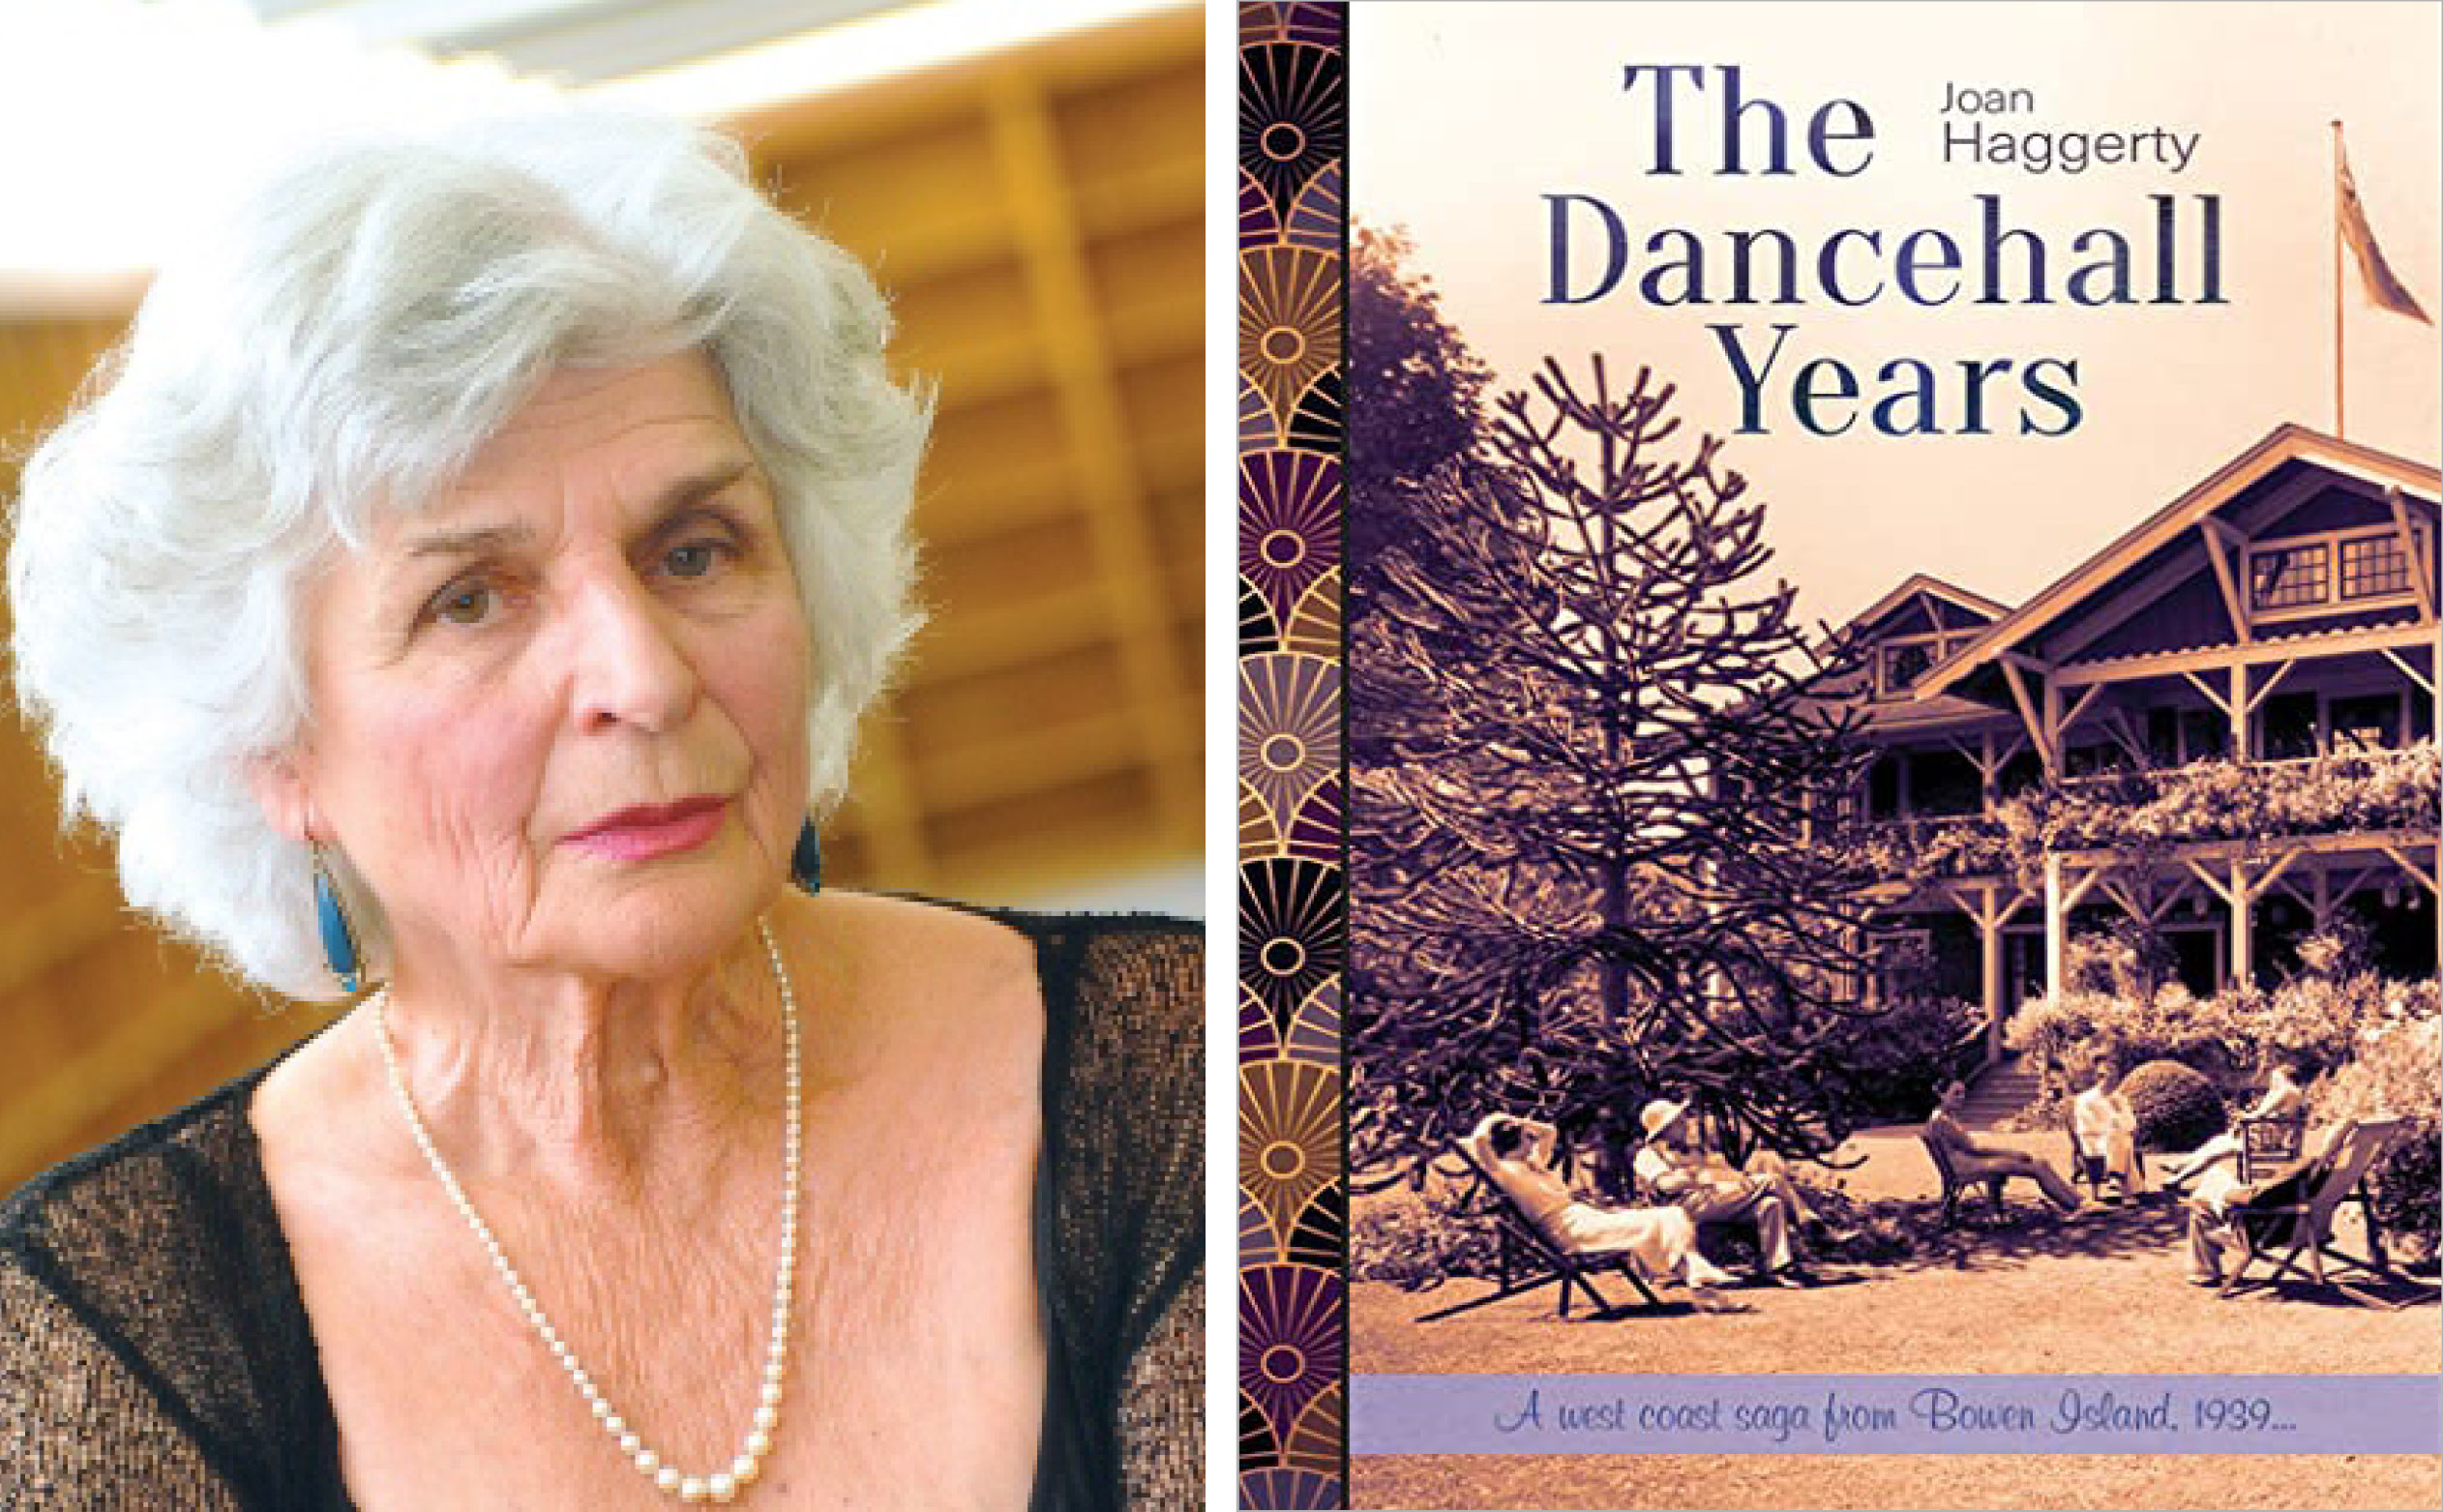 A headshot of author Joan Haggerty and cover of her book The Dancehall Years